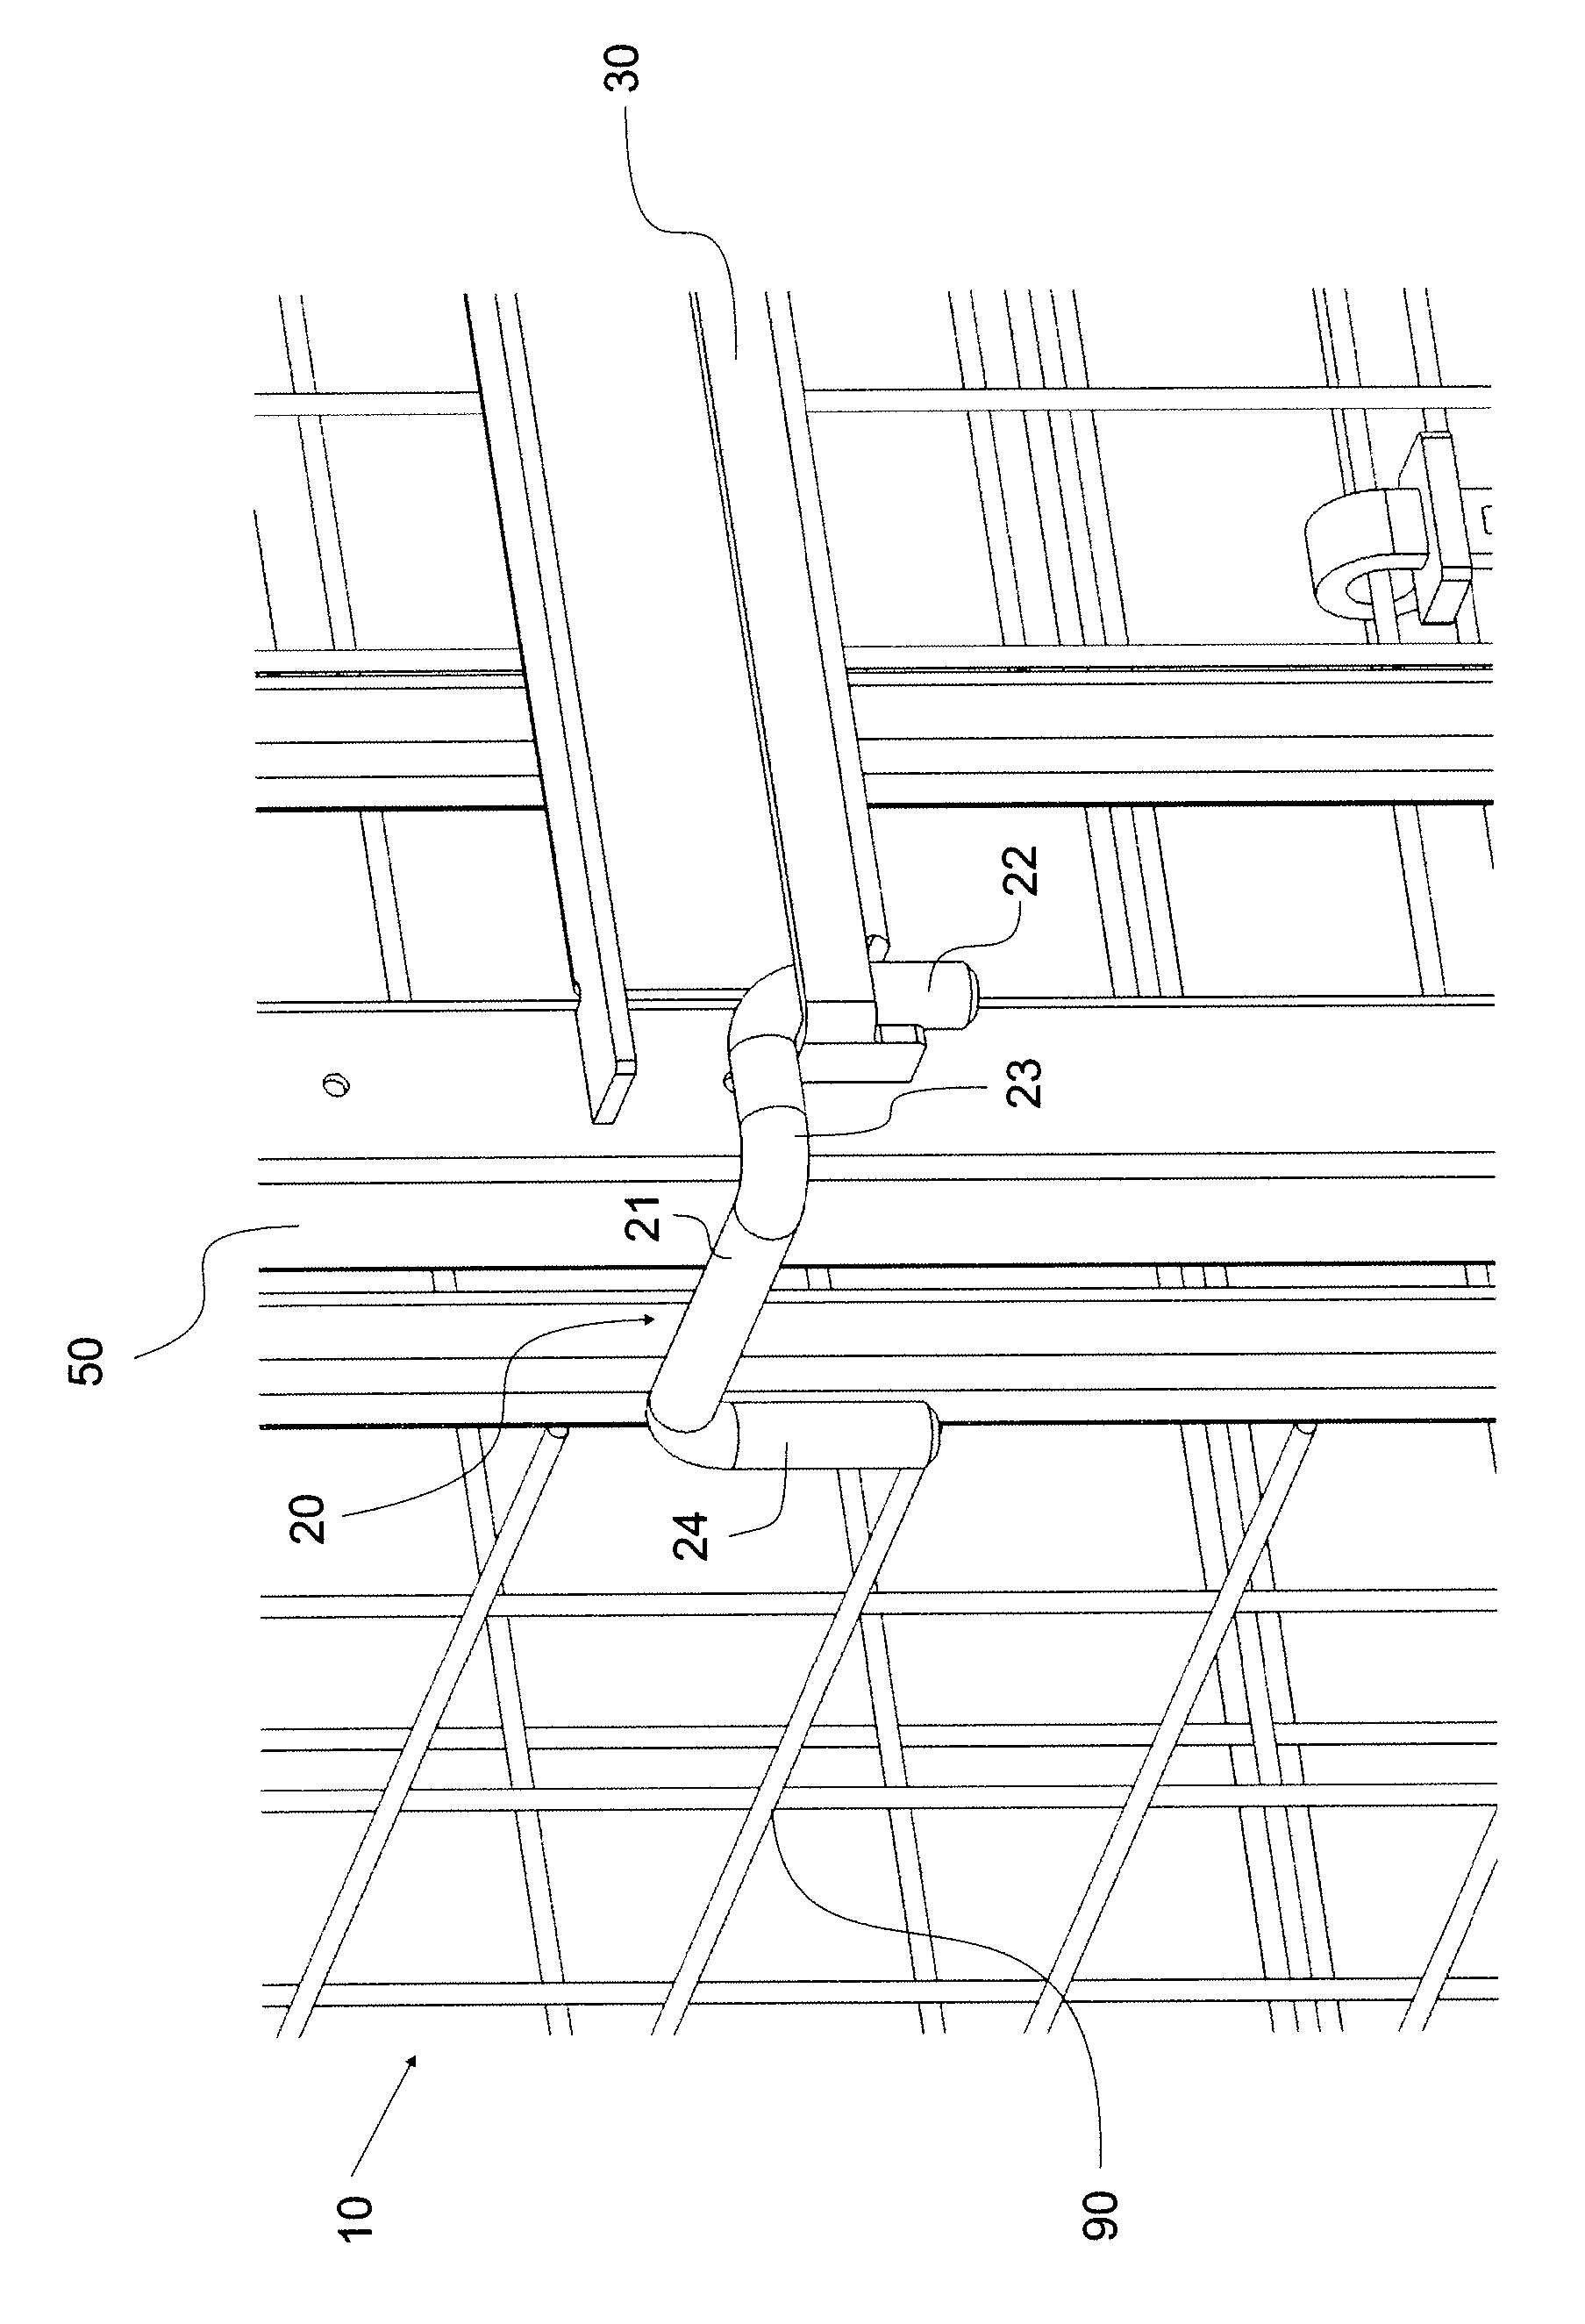 Cage for handling or storing goods